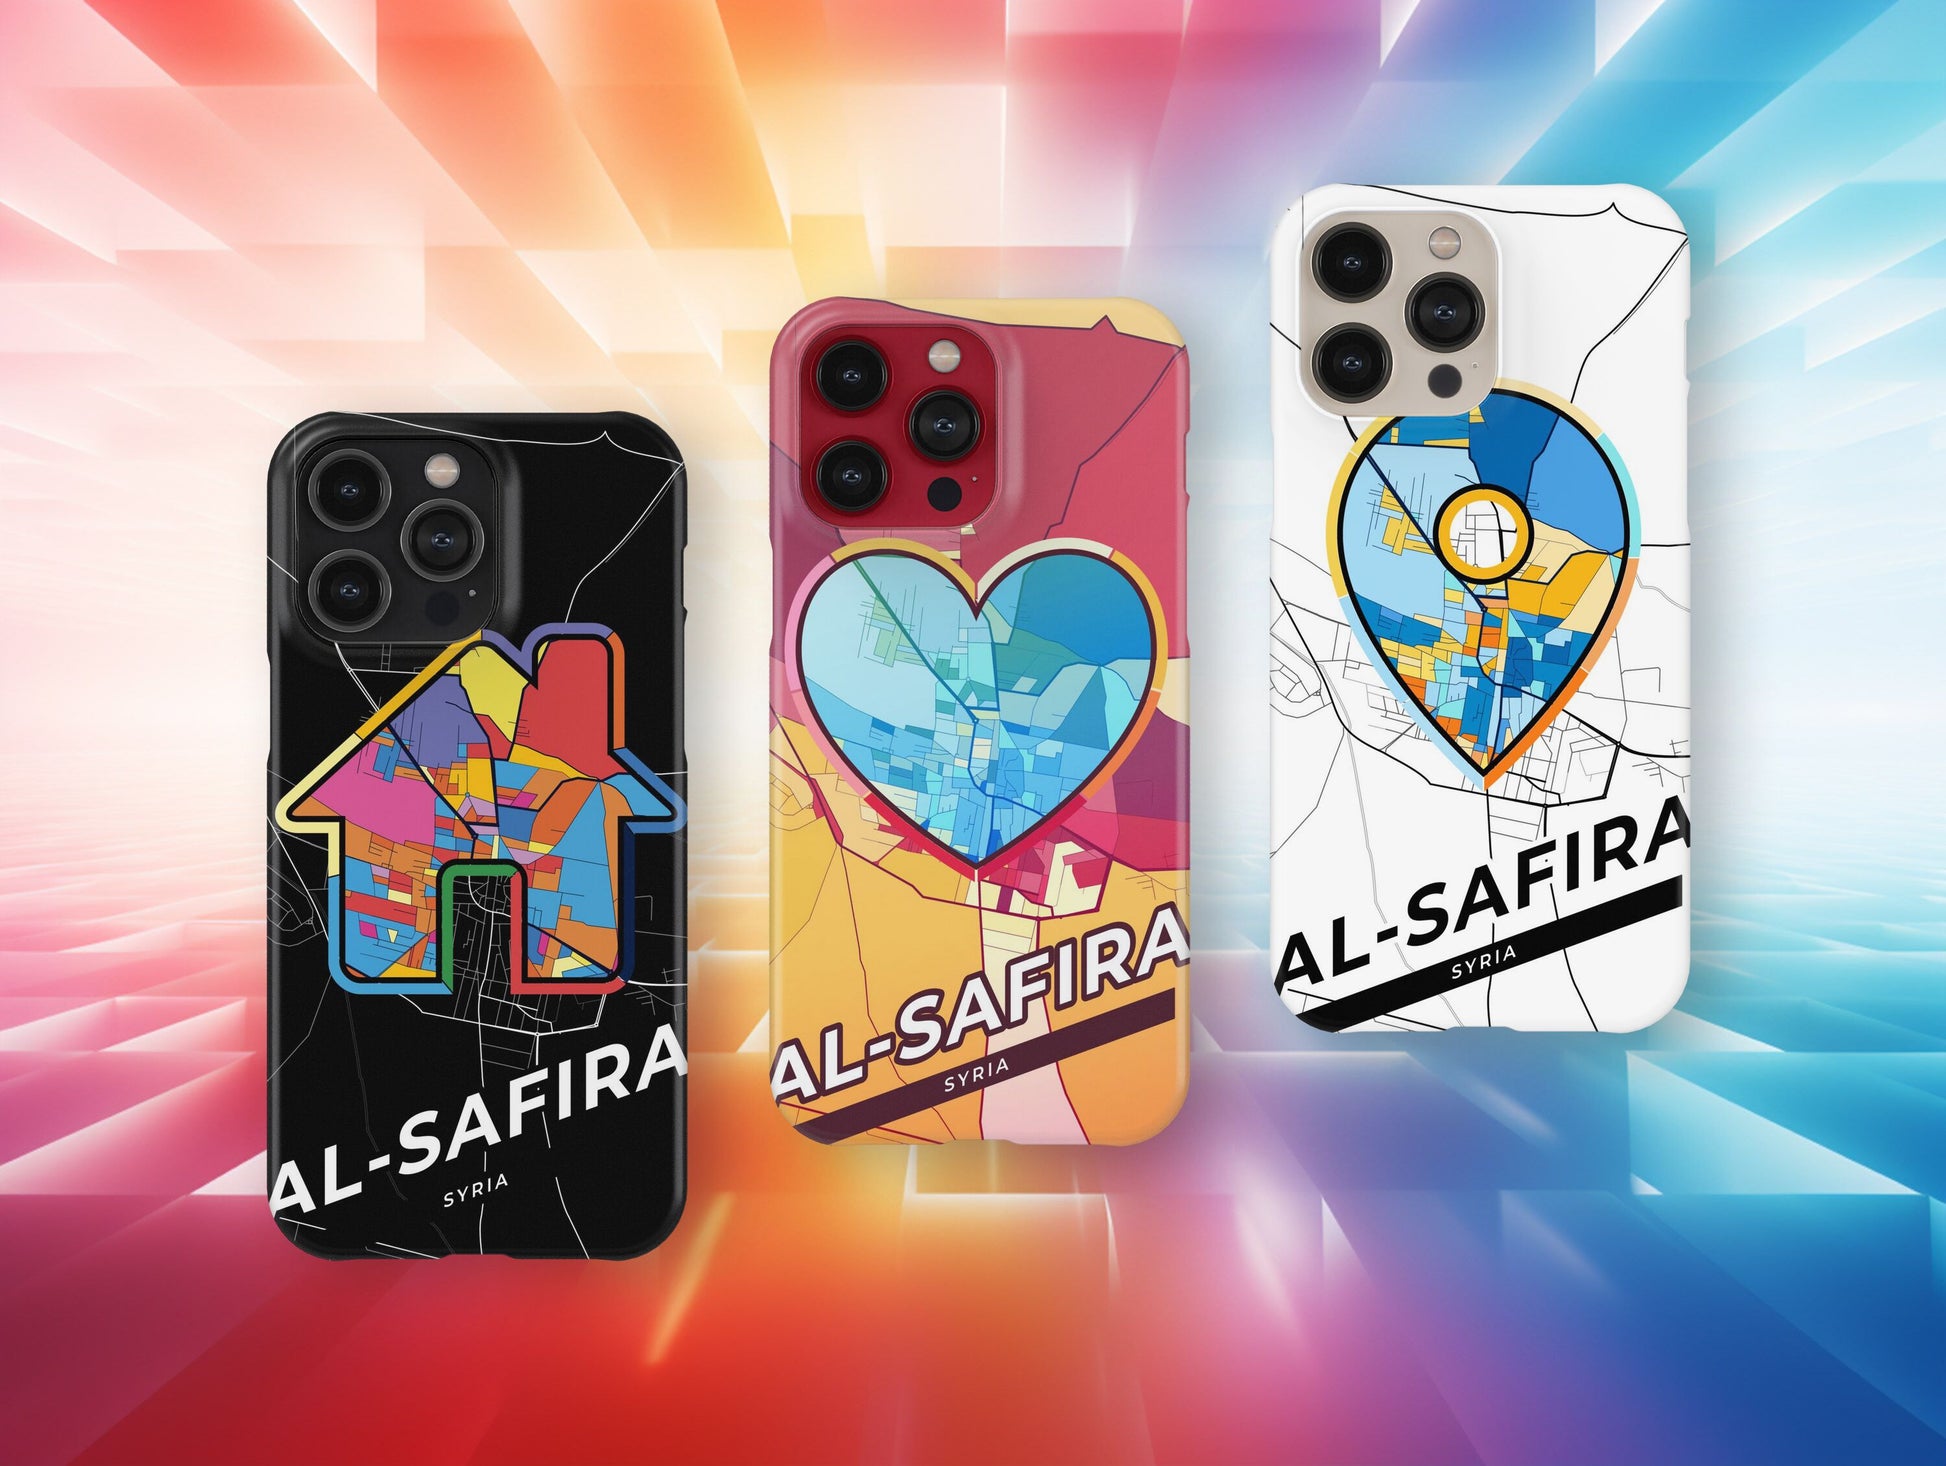 Al-Safira Syria slim phone case with colorful icon. Birthday, wedding or housewarming gift. Couple match cases.